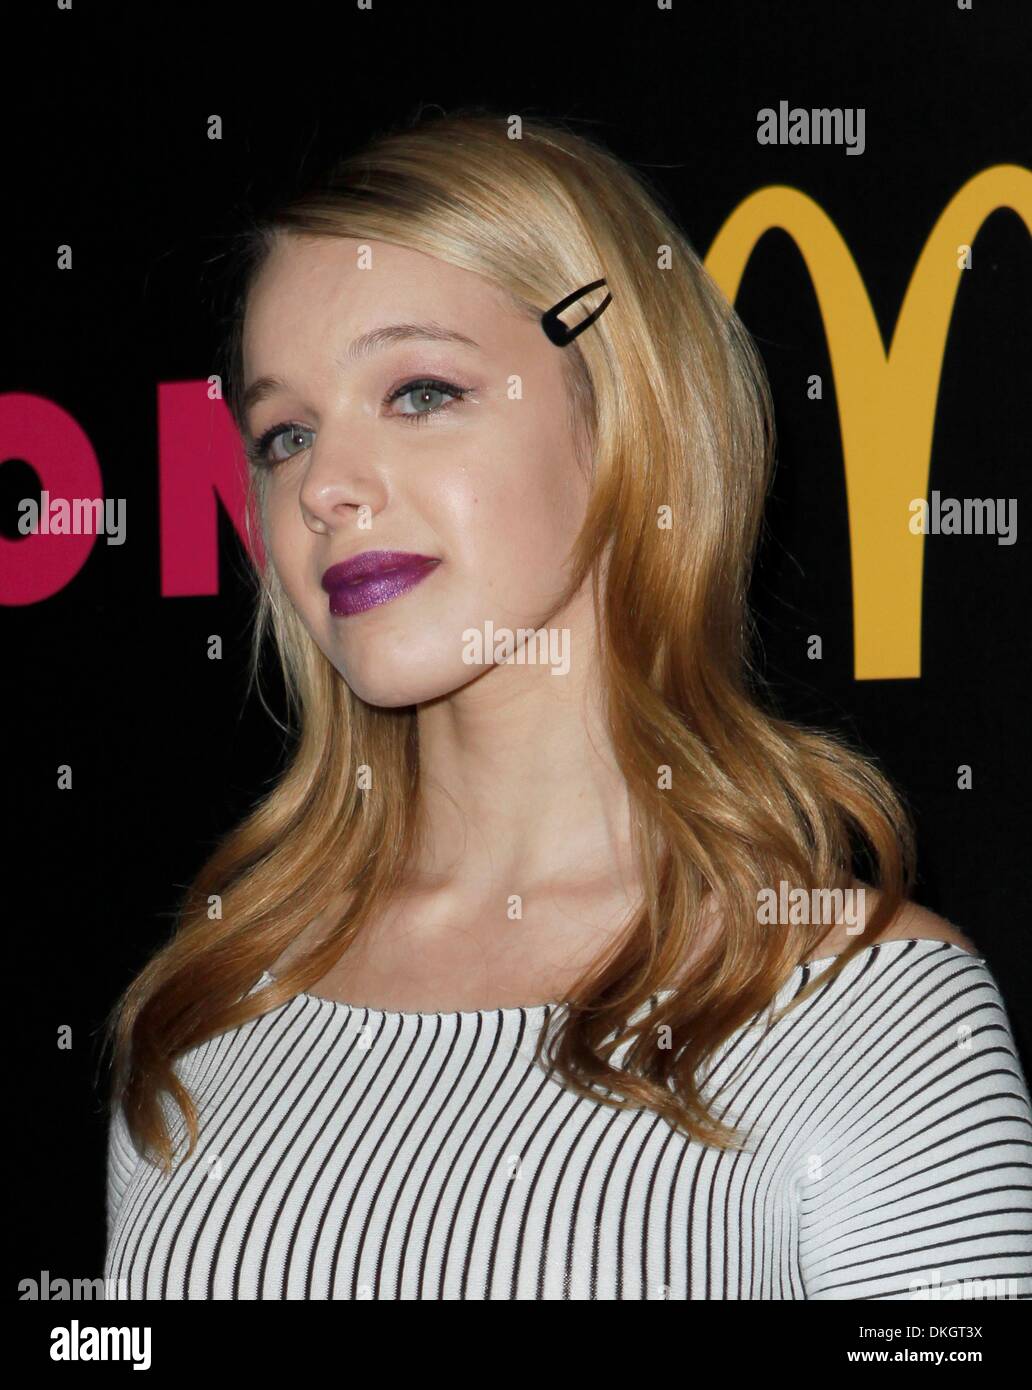 Los Angeles, CA, USA. 5th Dec, 2013. Sadie Calvano at arrivals for NYLON Magazine December Issue Celebration, Smashbox Studios West Hollywood, Los Angeles, CA December 5, 2013. Credit:  Emiley Schweich/Everett Collection/Alamy Live News Stock Photo